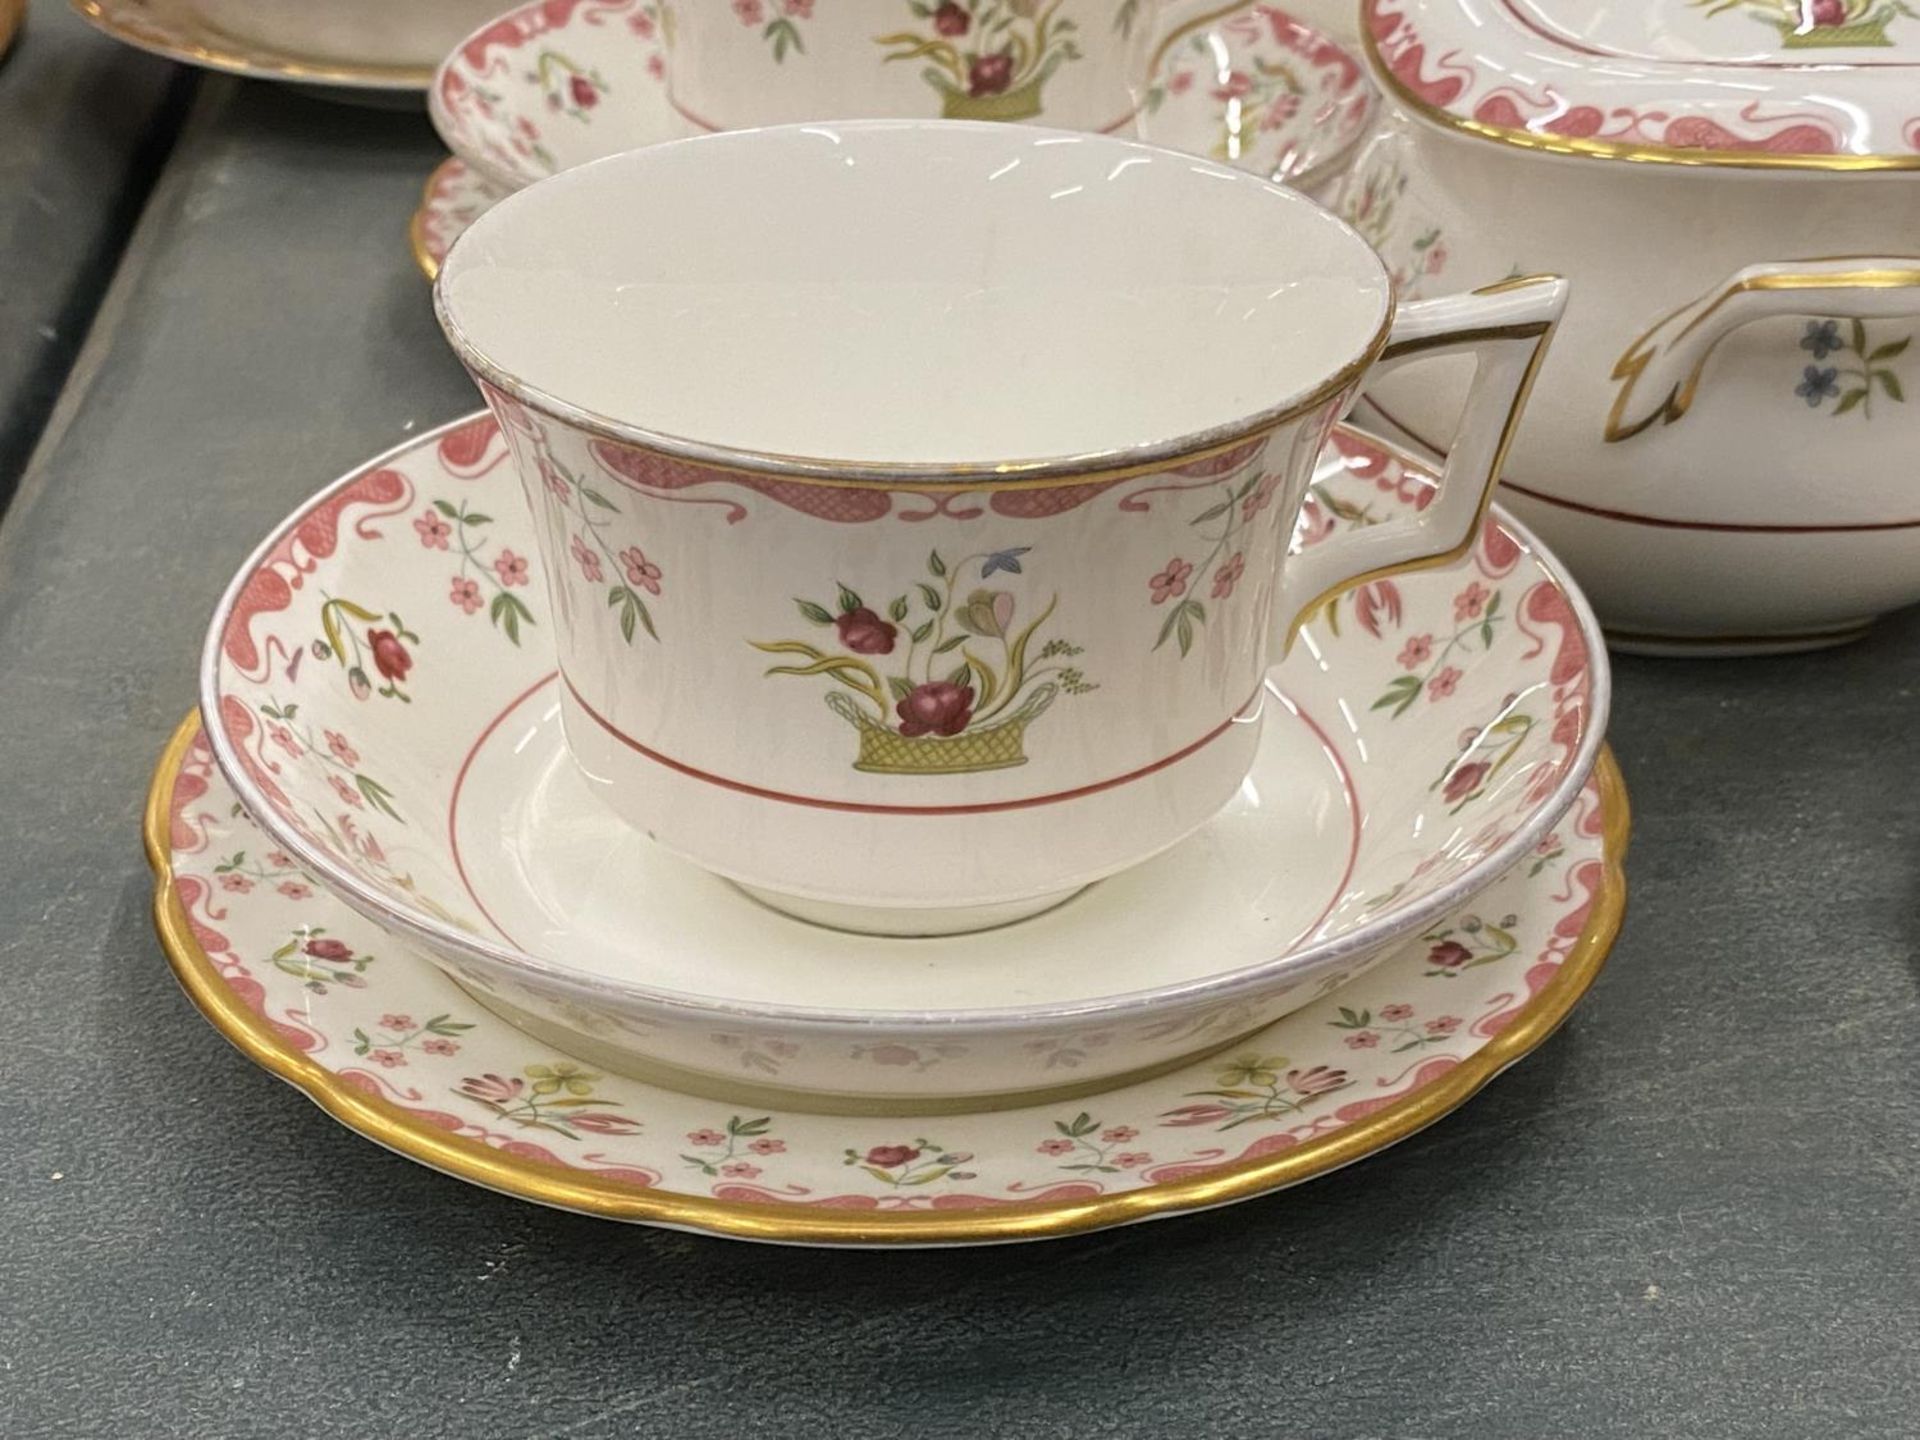 A WEDGWOOD 'BIANCA' PART TEASET TO INCLUDE A CAKE PLATE, SUGAR BOWL, CREAM JUG, CUPS, SAUCERS AND - Image 2 of 4